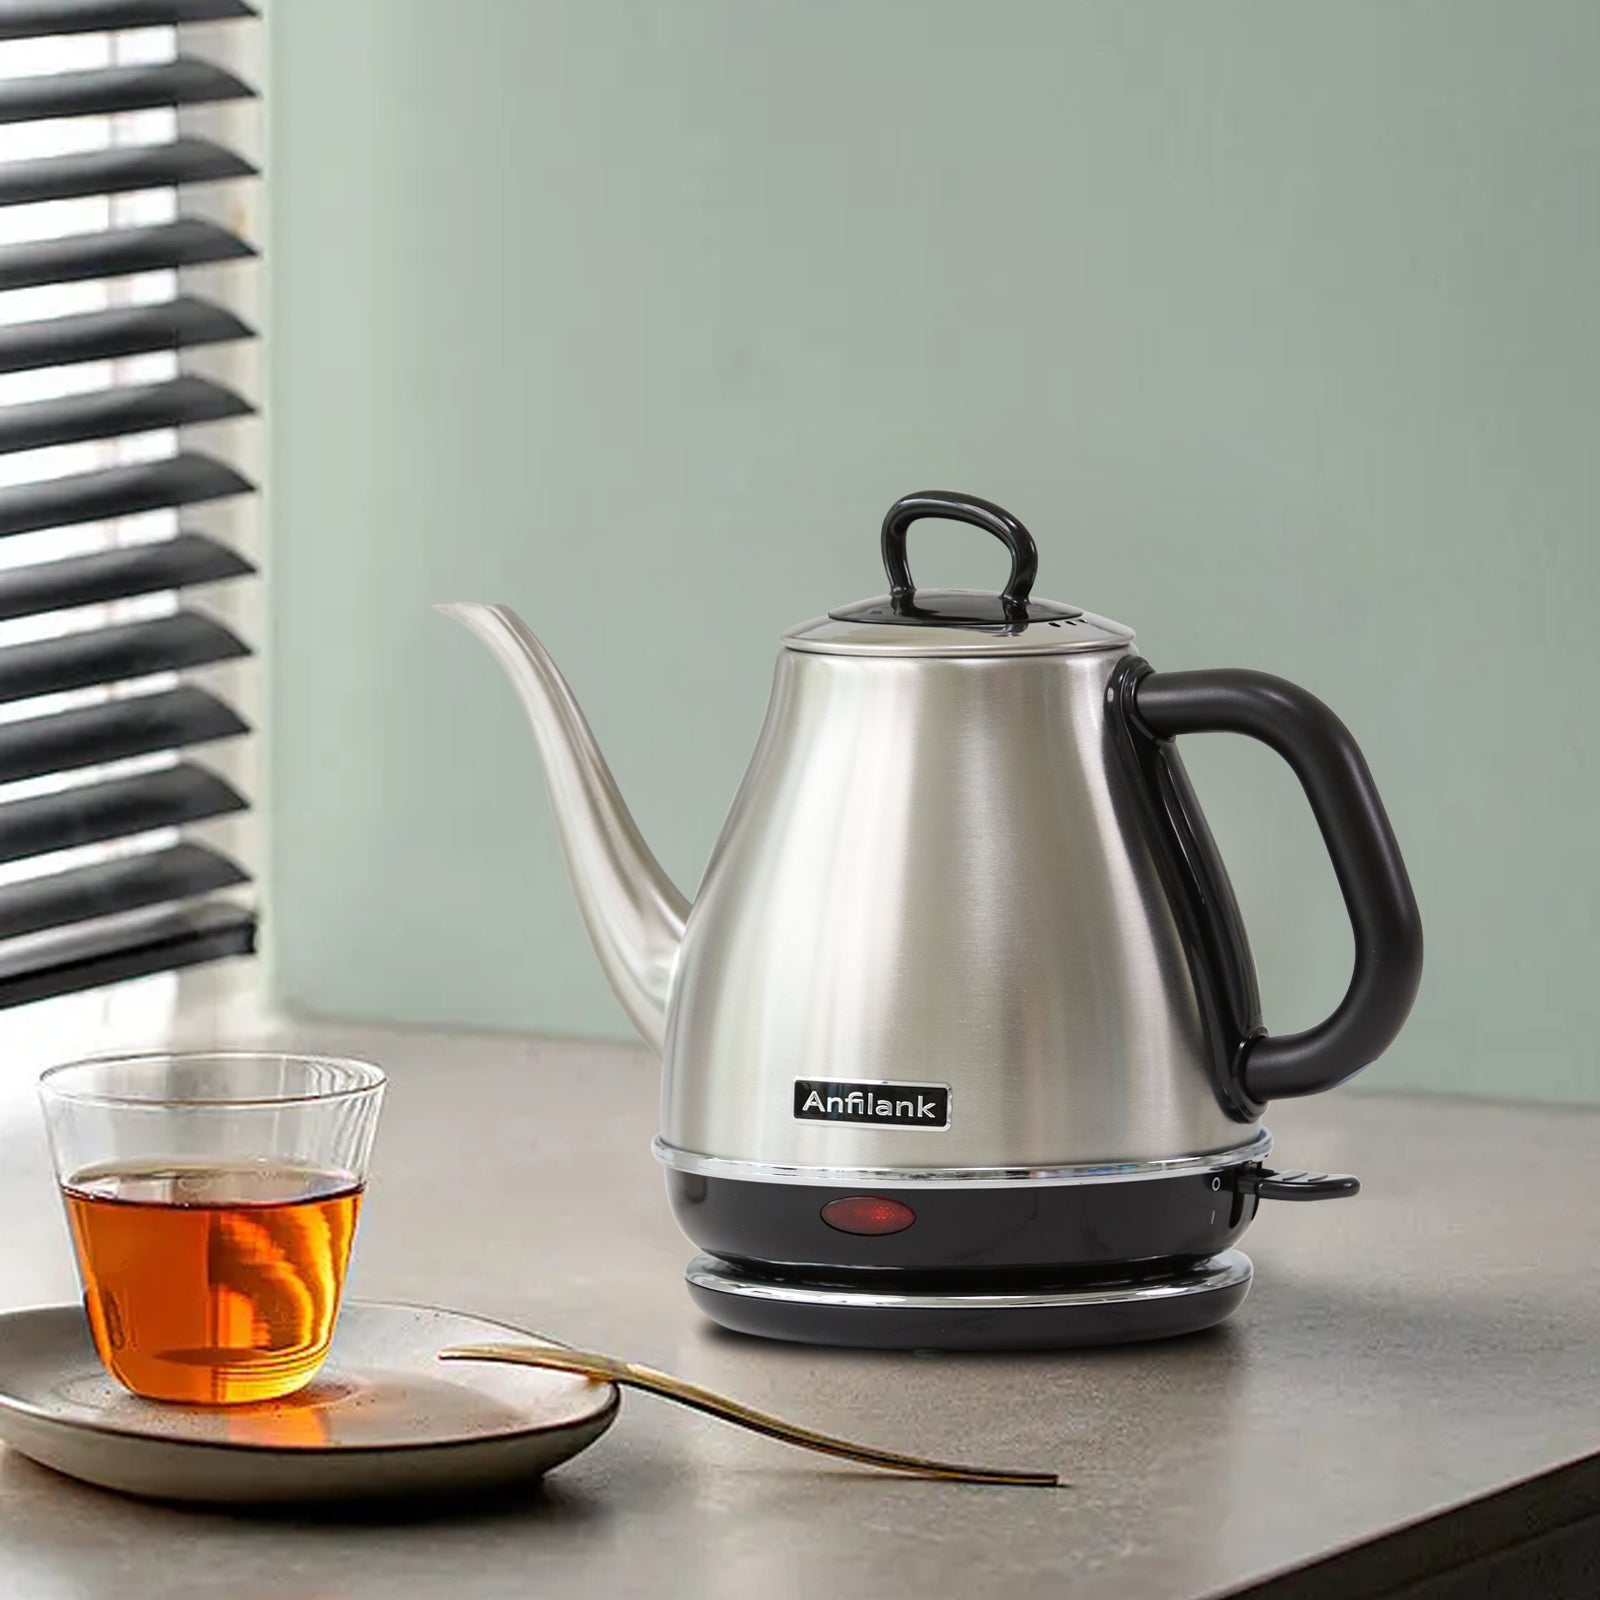 ELECTRIC KETTLE Gooseneck Stainless Steel BPA Free Pour over